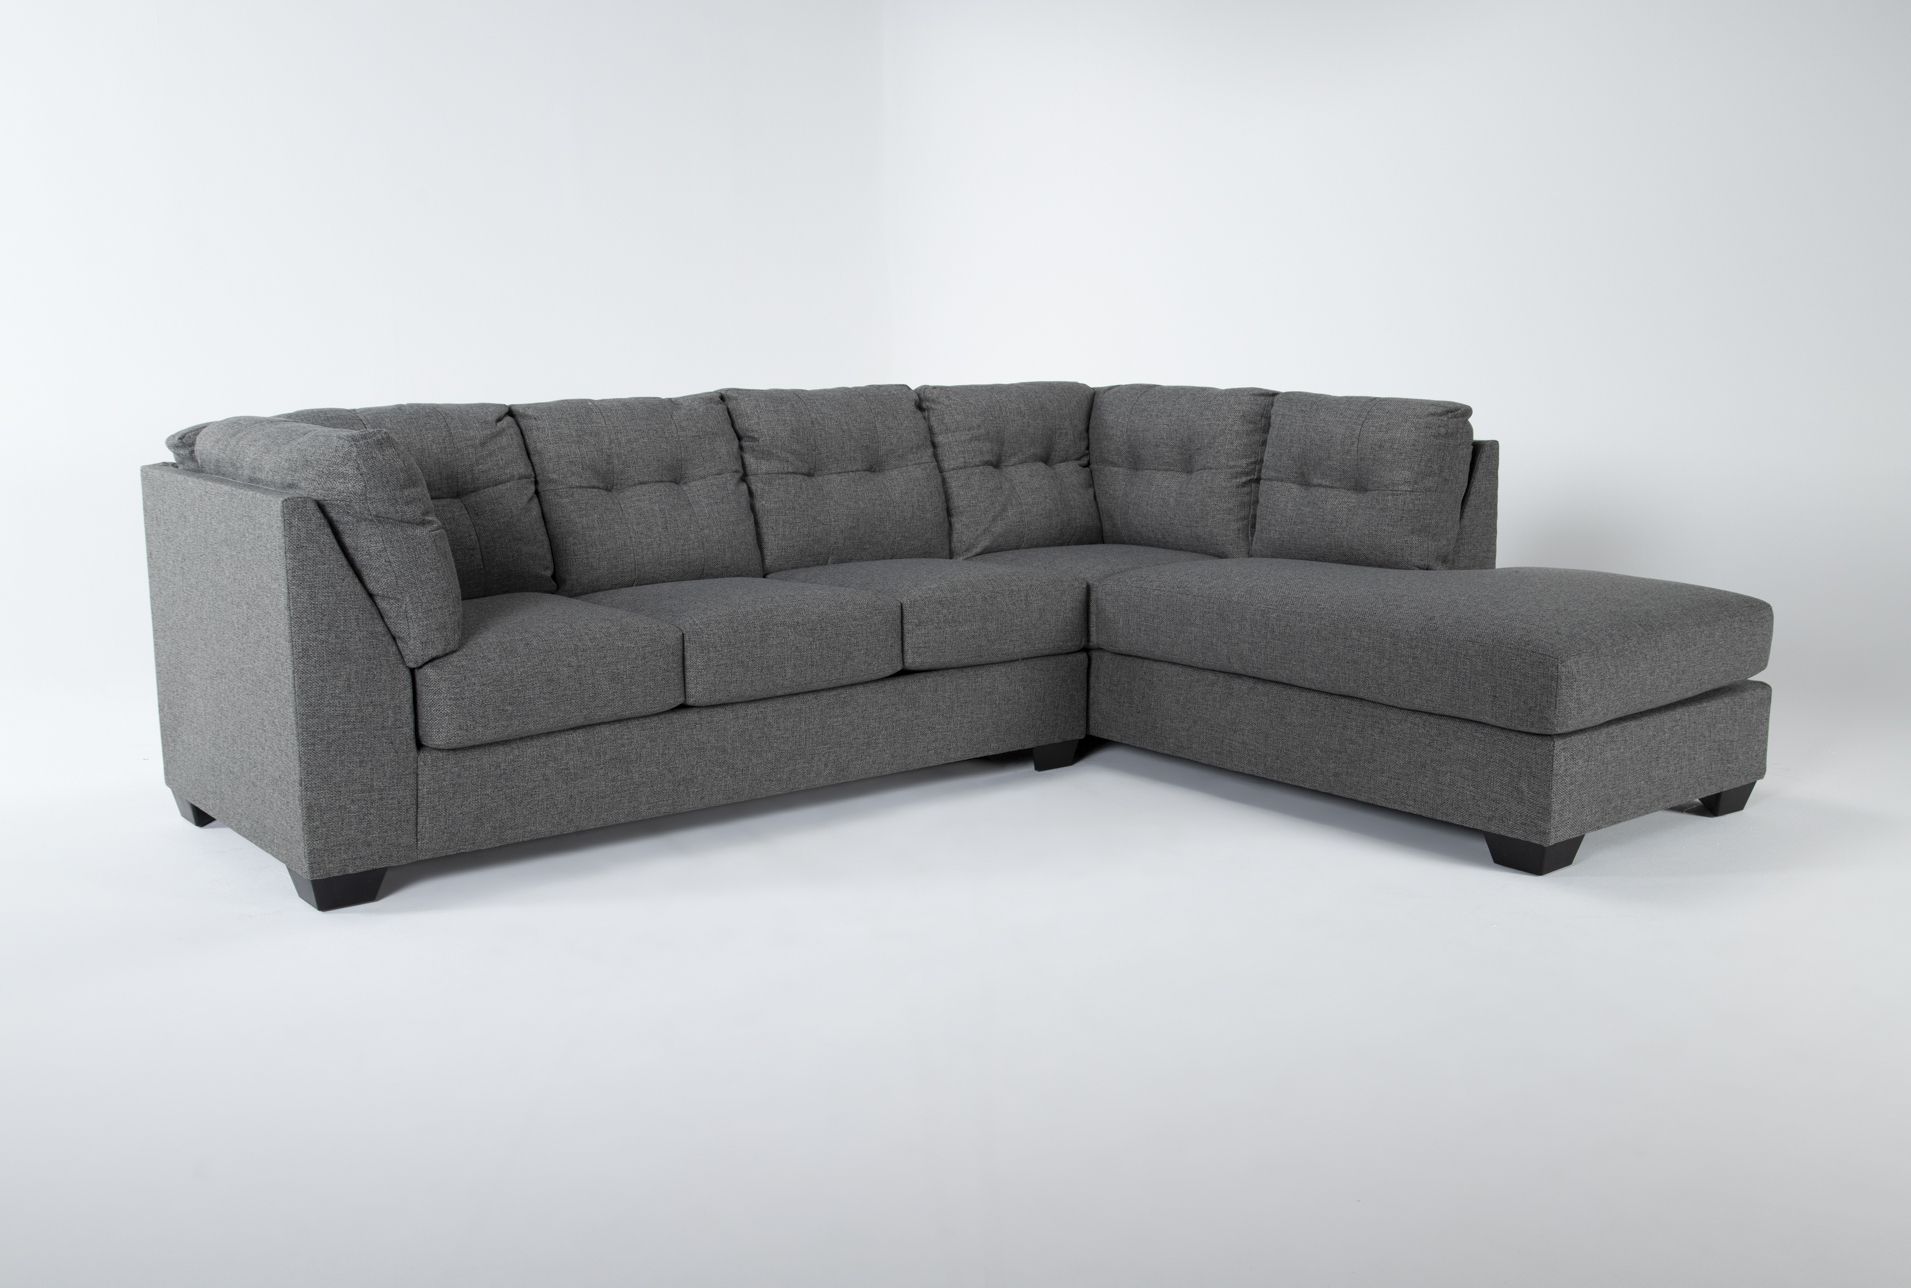 Arrowmask Charcoal 2 Piece 115" Full Sleeper Sectional With Left Arm Regarding Popular Left Or Right Facing Sleeper Sectionals (Photo 4 of 15)